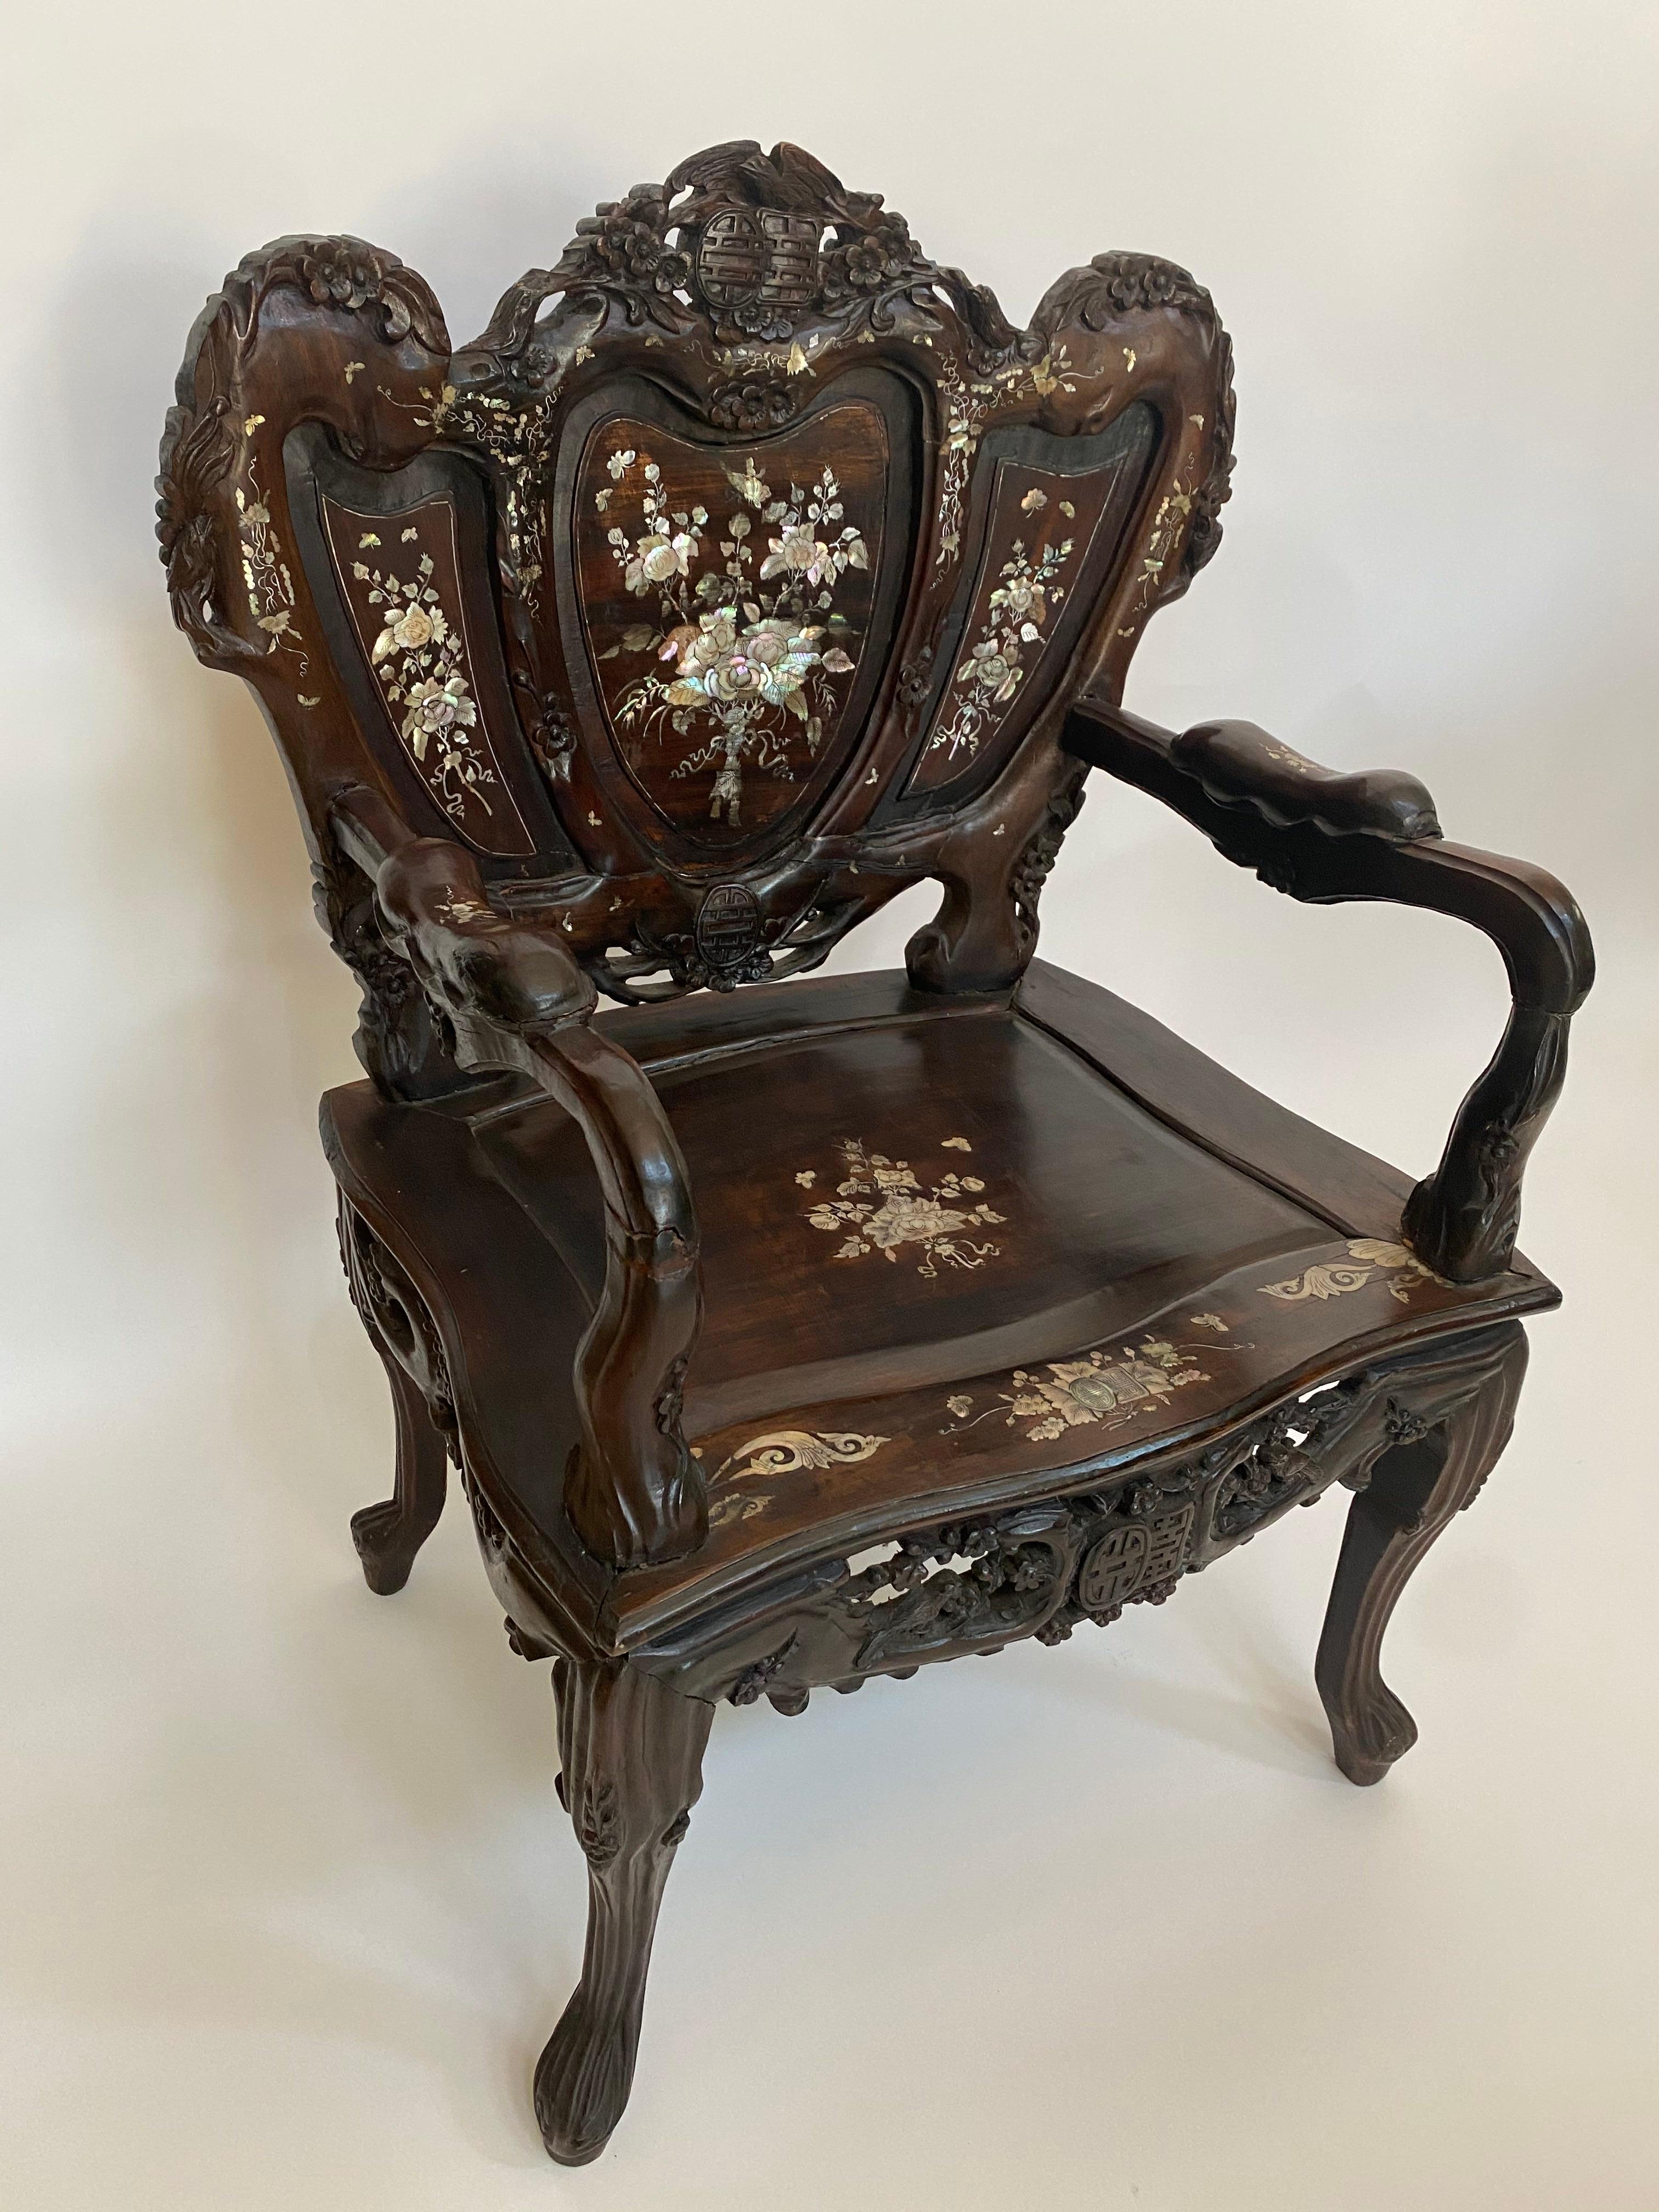 20th century pair of mother of pearl inlay Chinese armchairs. Decorated all over with intricate beautiful floral designs, some designs are carved and some are painted.